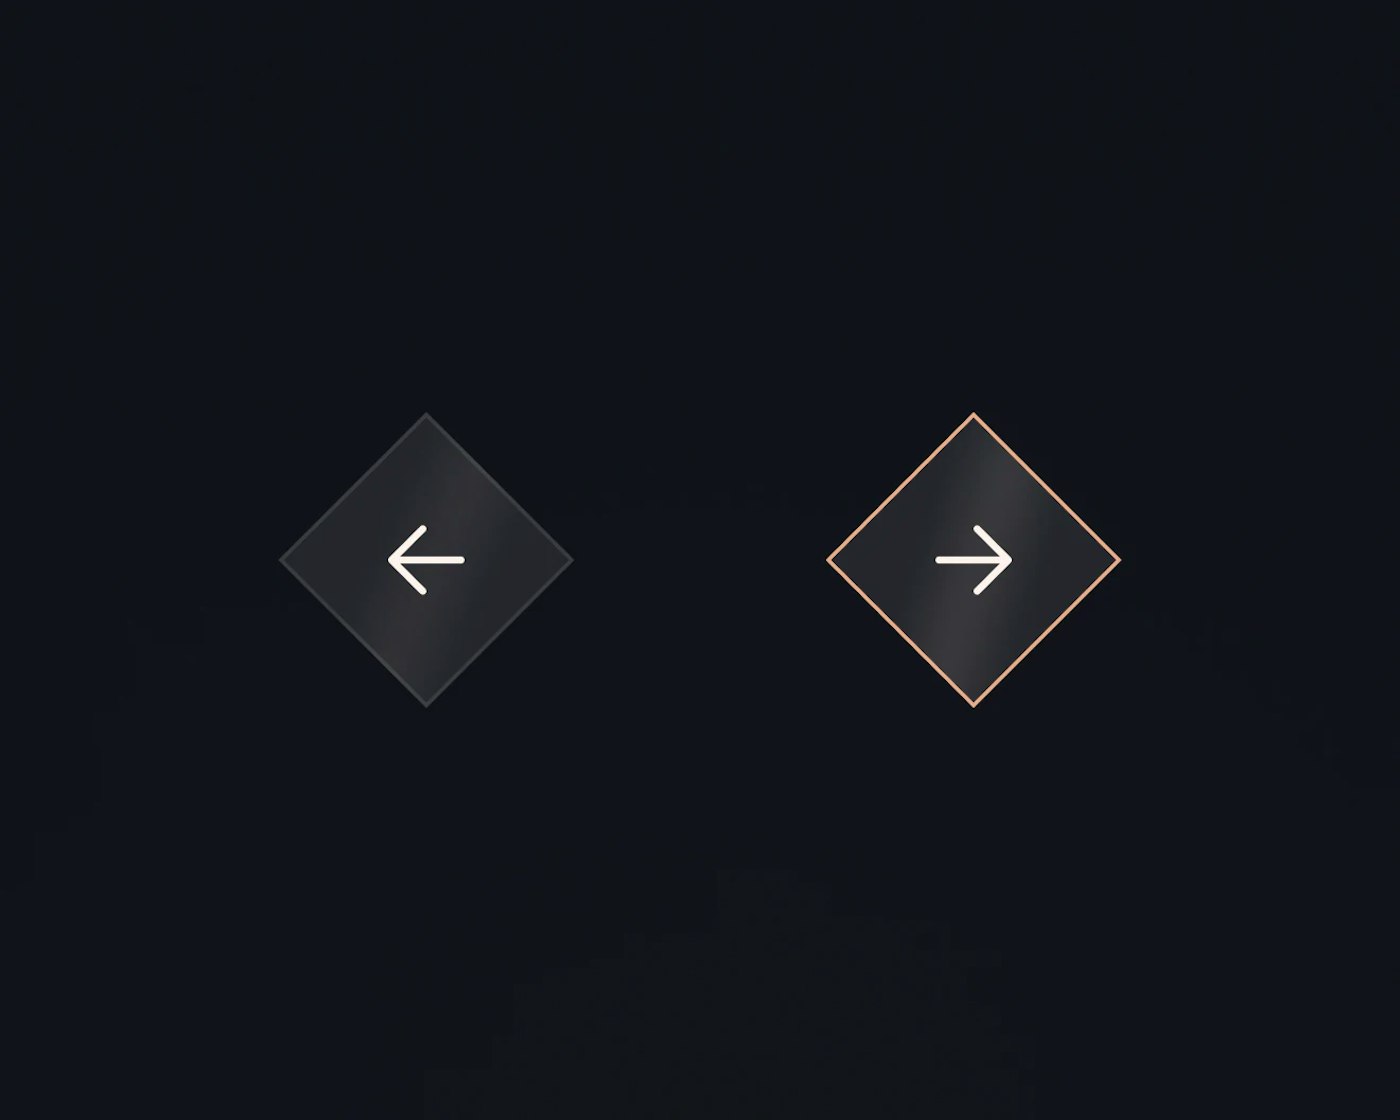 Carousel control buttons on a dark background; to the left is a back arrow inside a diamond with a subtle glow, and to the right is a forward arrow inside a diamond with an orange outline.